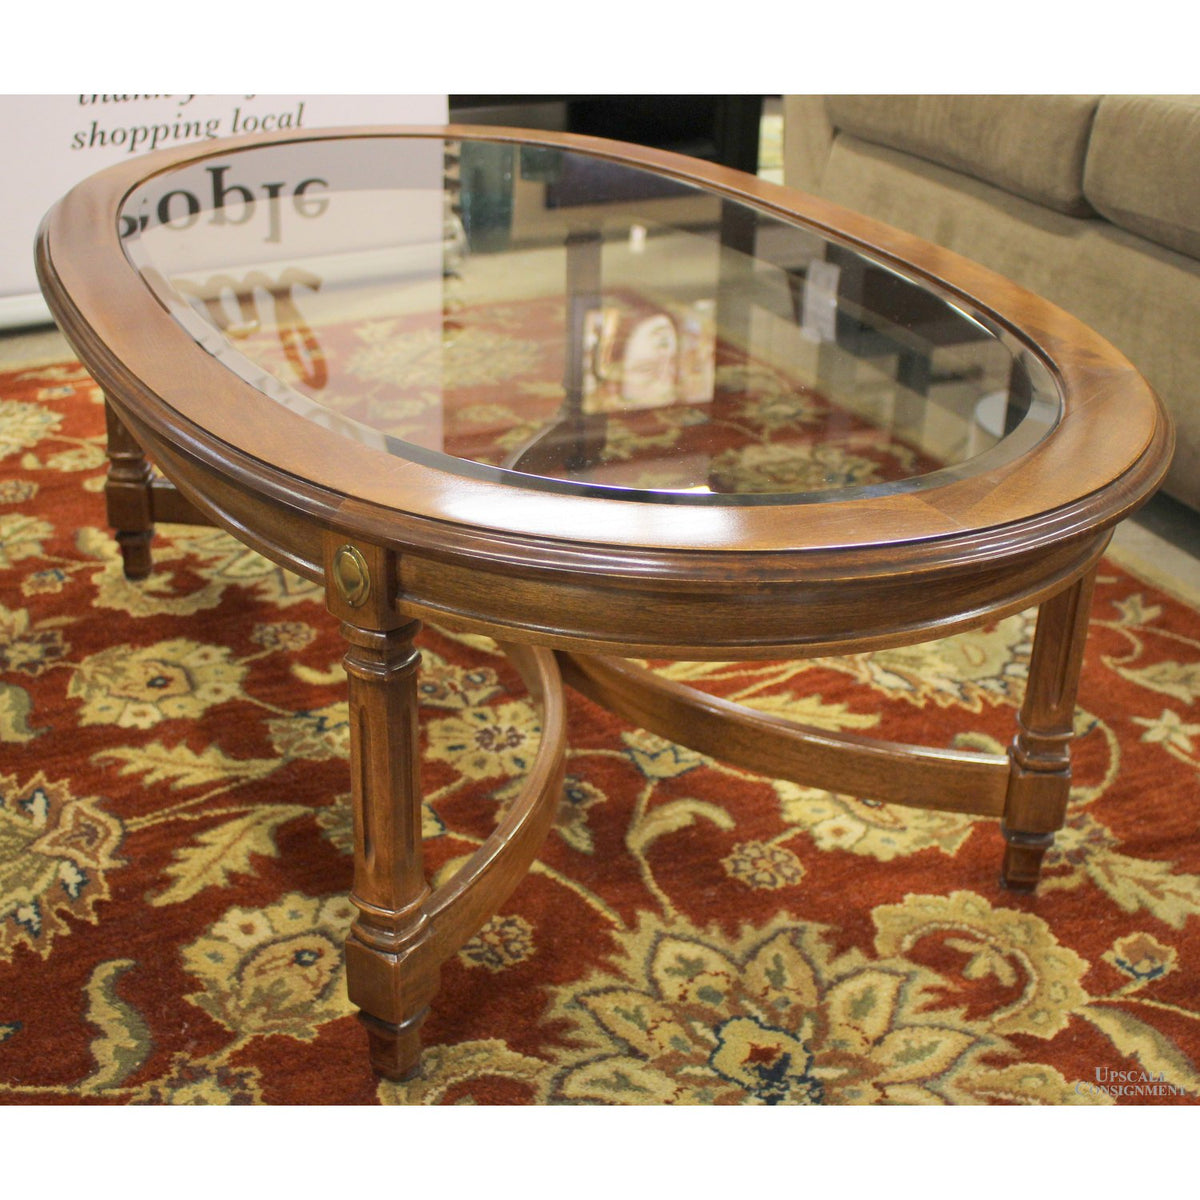 Oval Glass Insert Coffee Table